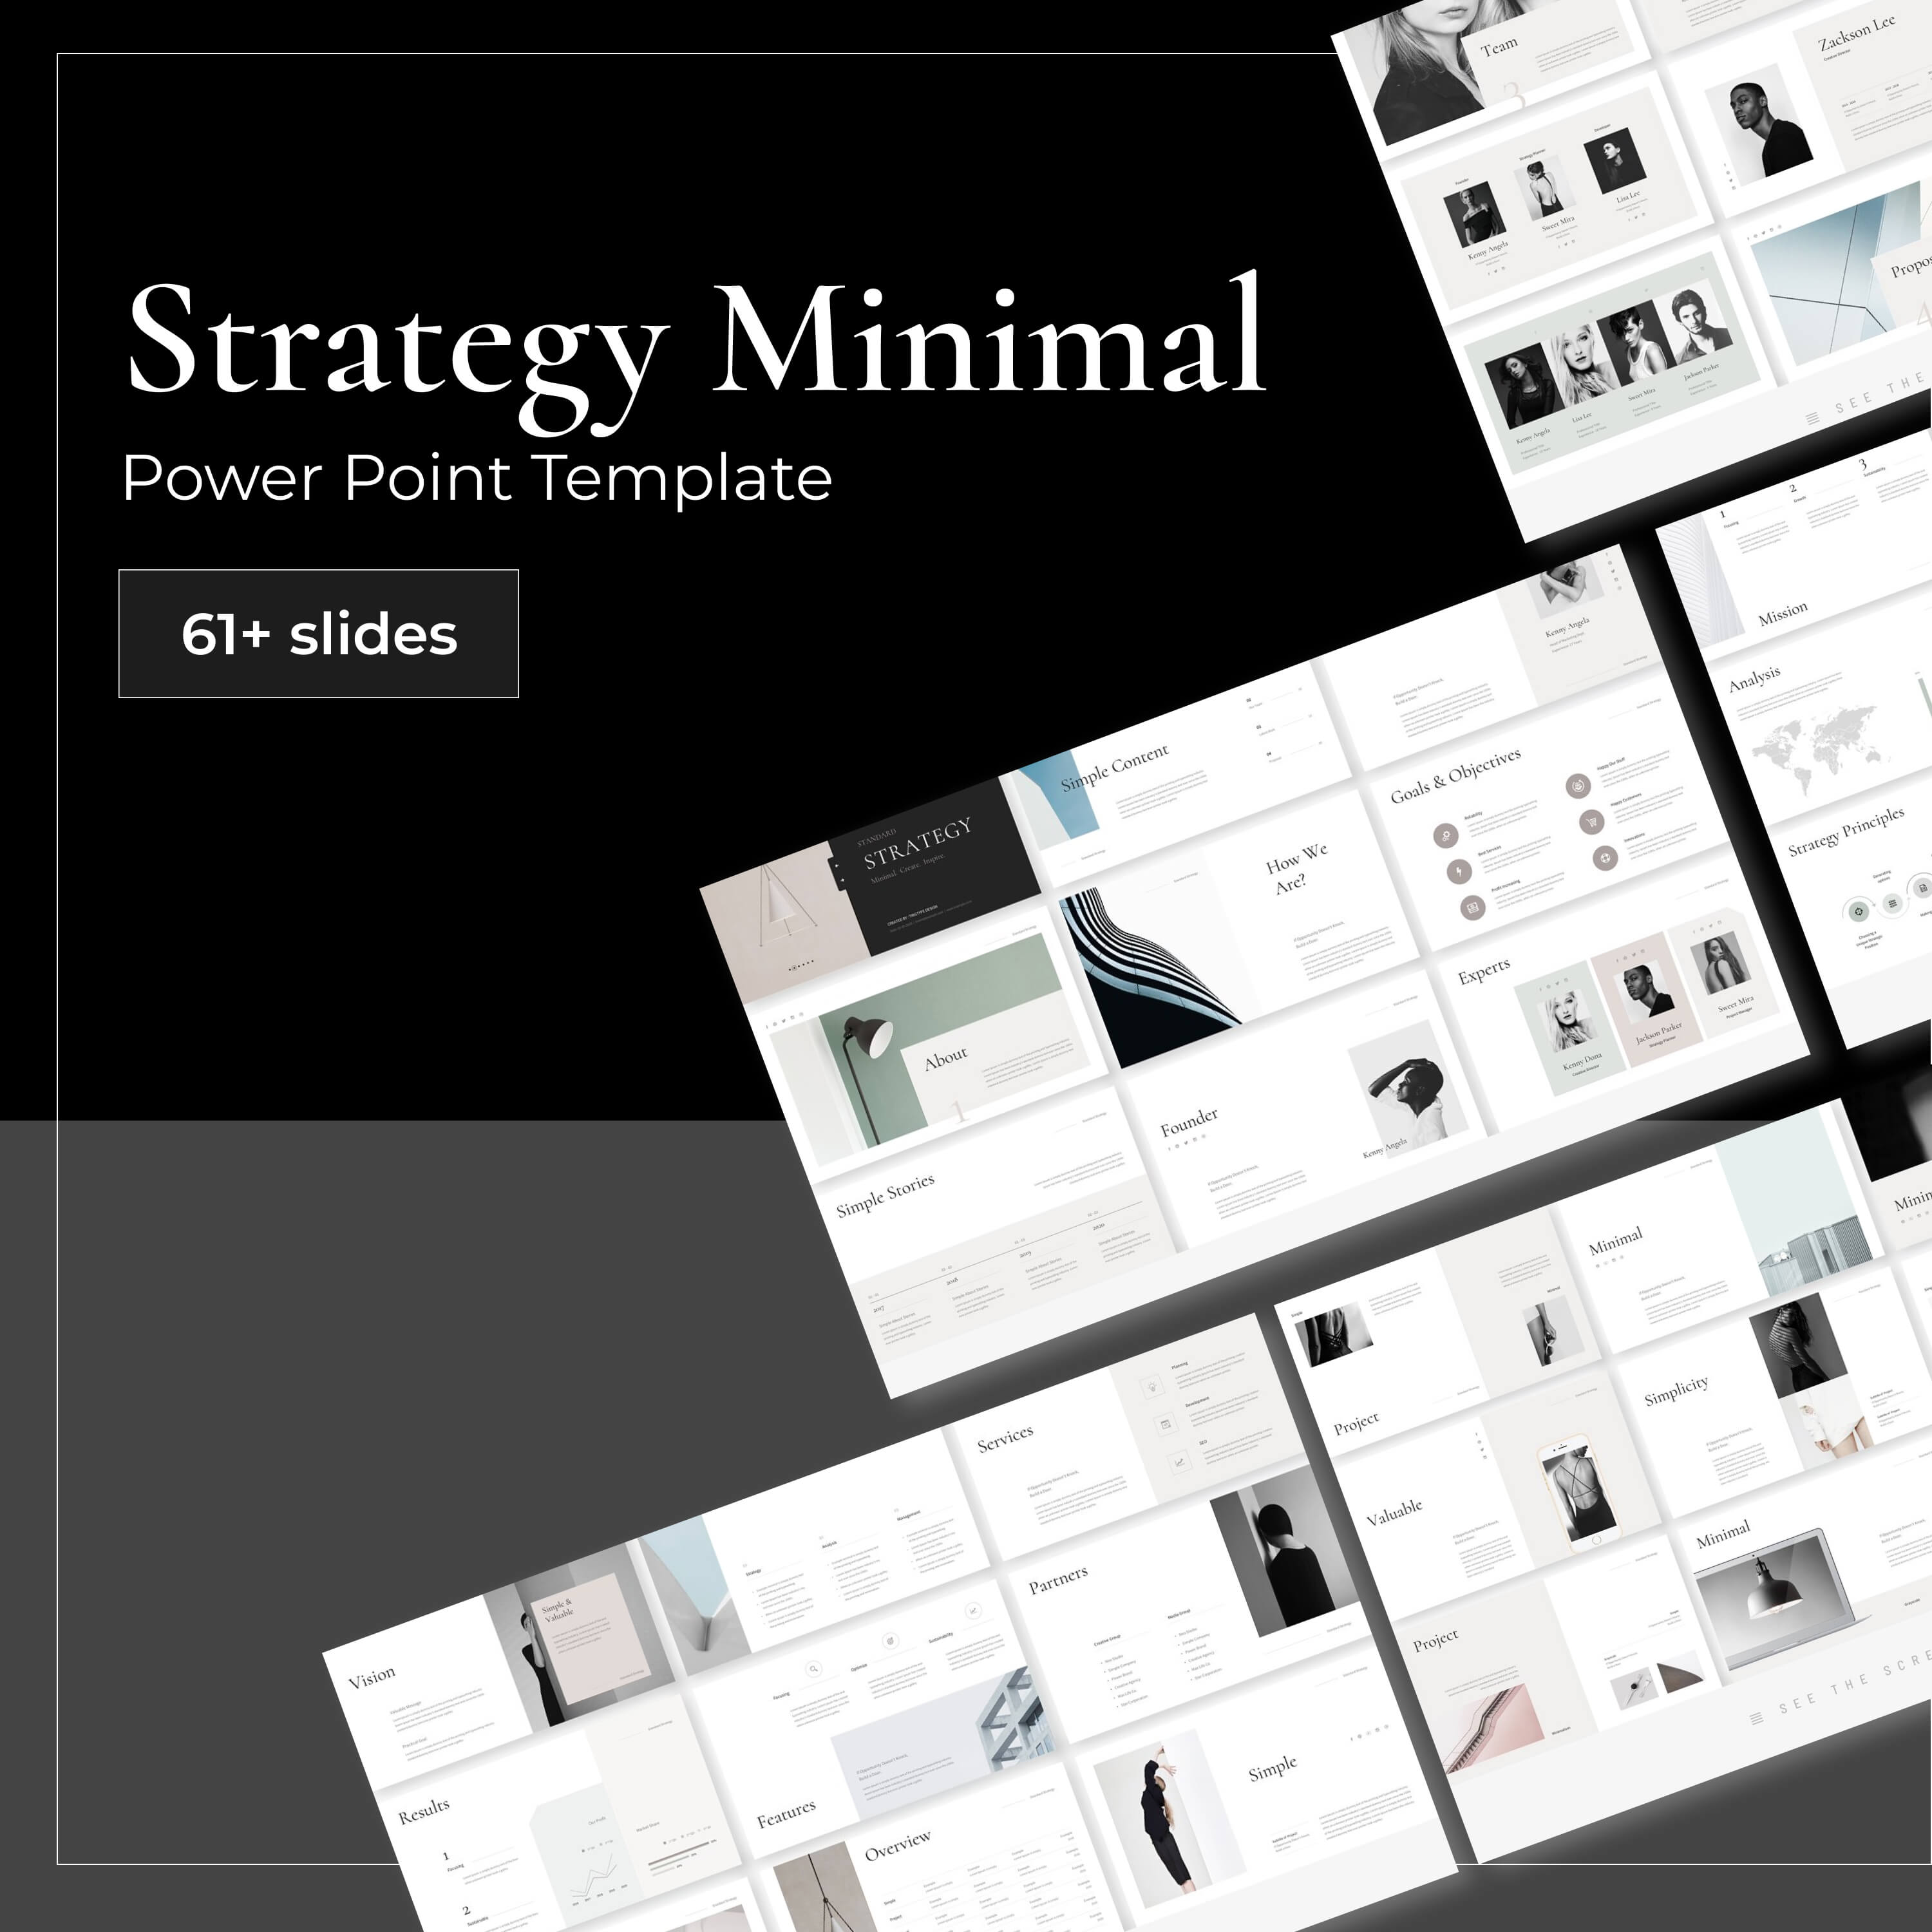 Strategy minimal powerpoint template.